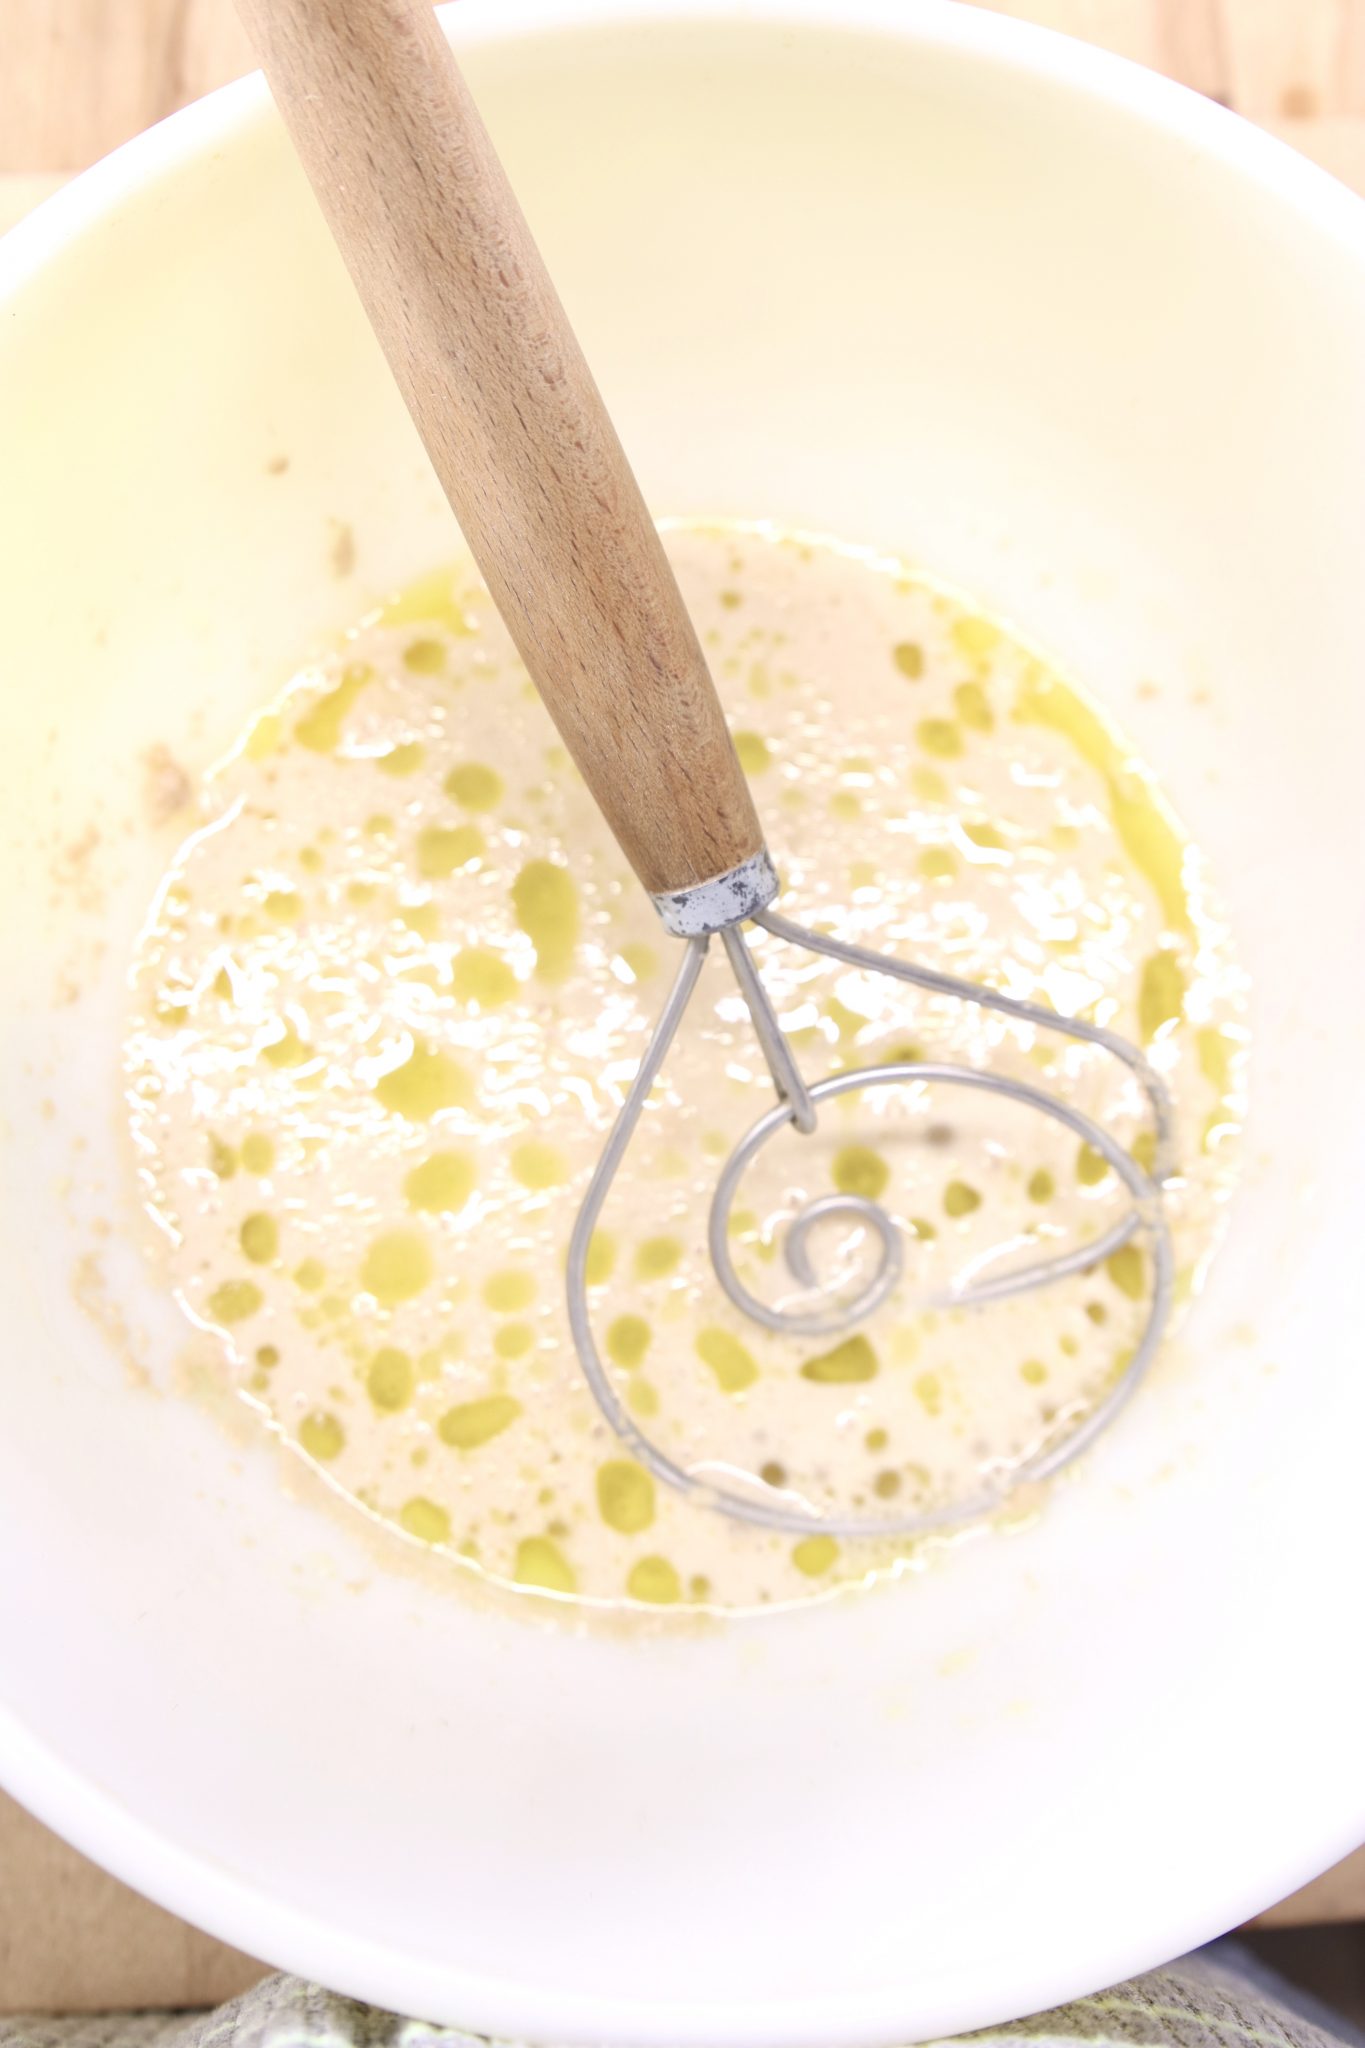 yeast, water, sugar and oil in a bowl with a dough whisk